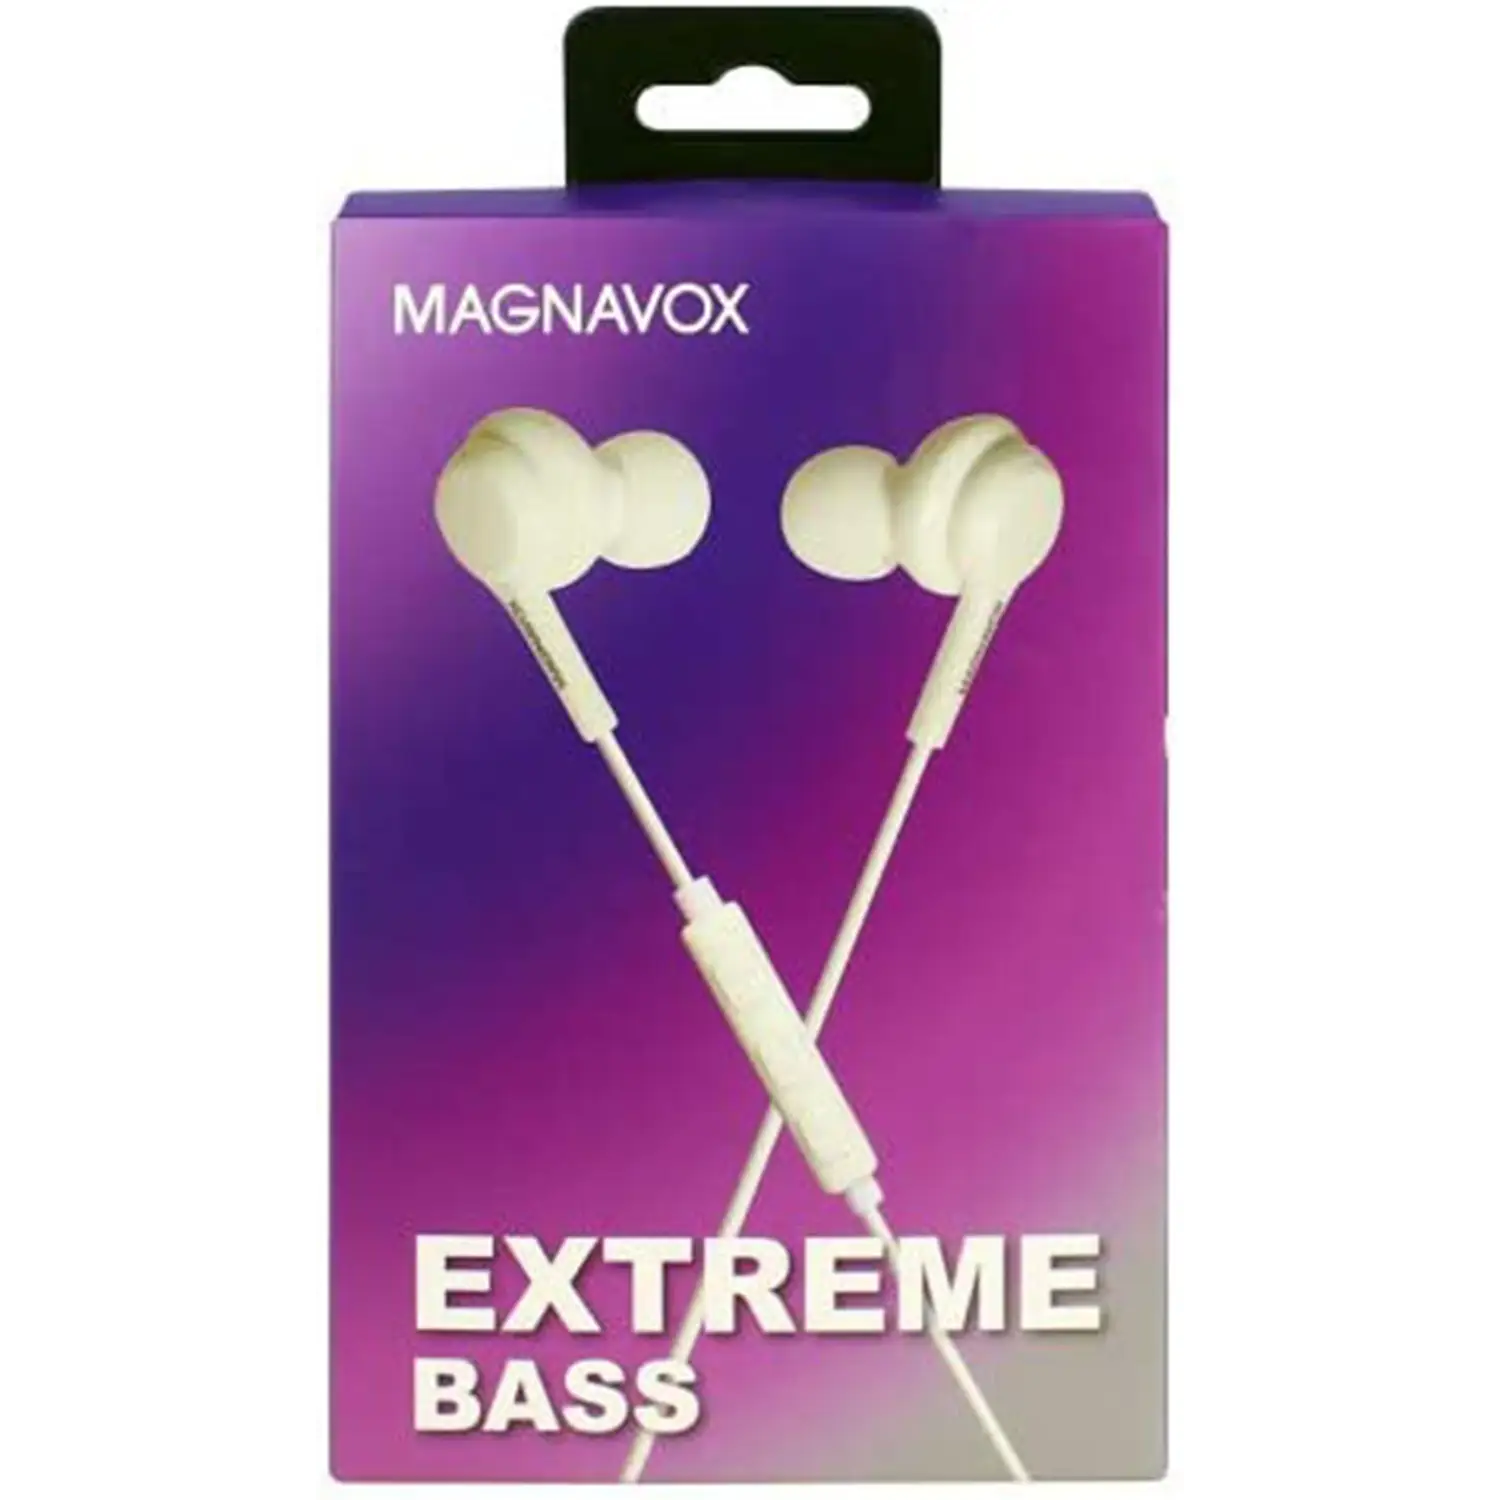 Magnavox Extreme Base Earbuds w/ Microphone (White)